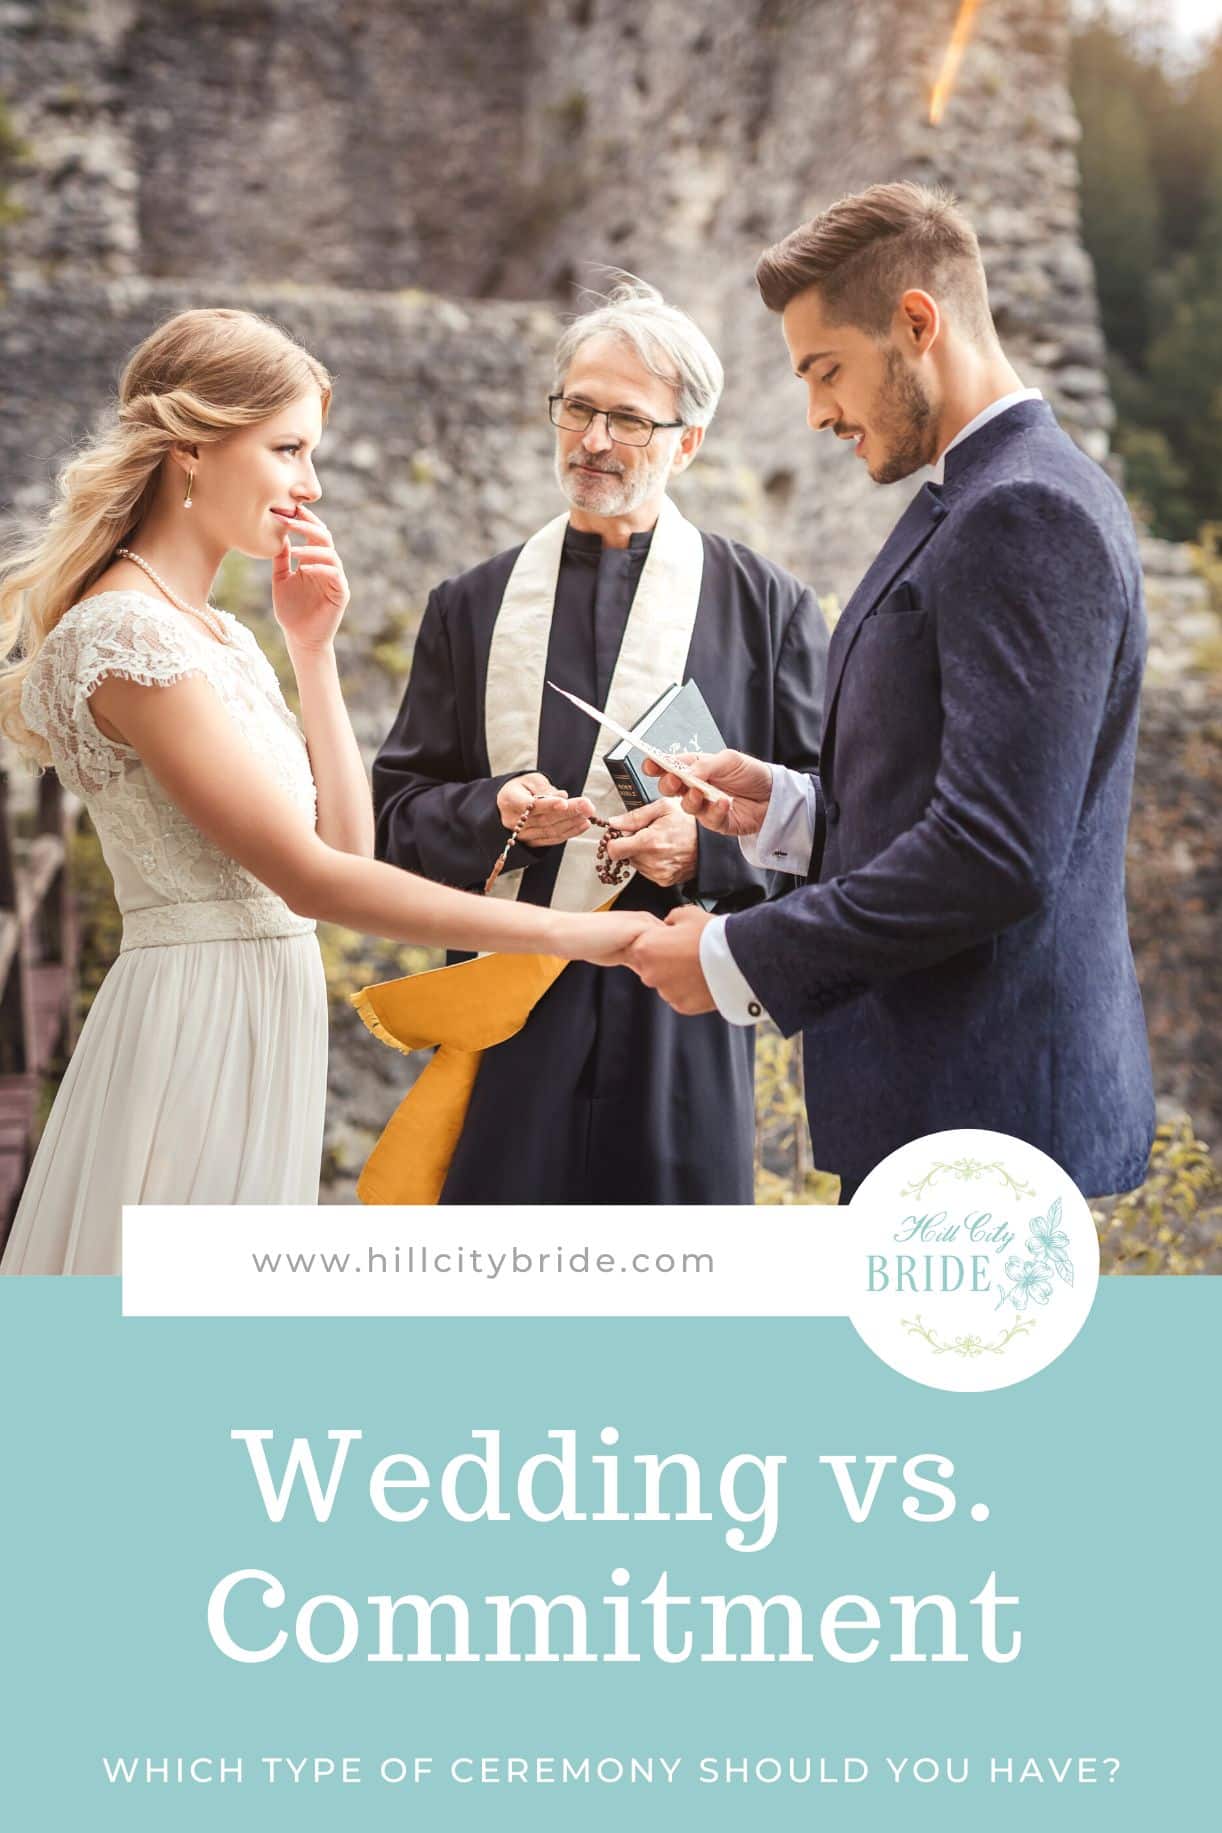 Should You Tell Your Wedding Guests You Are Not Getting Legally Married